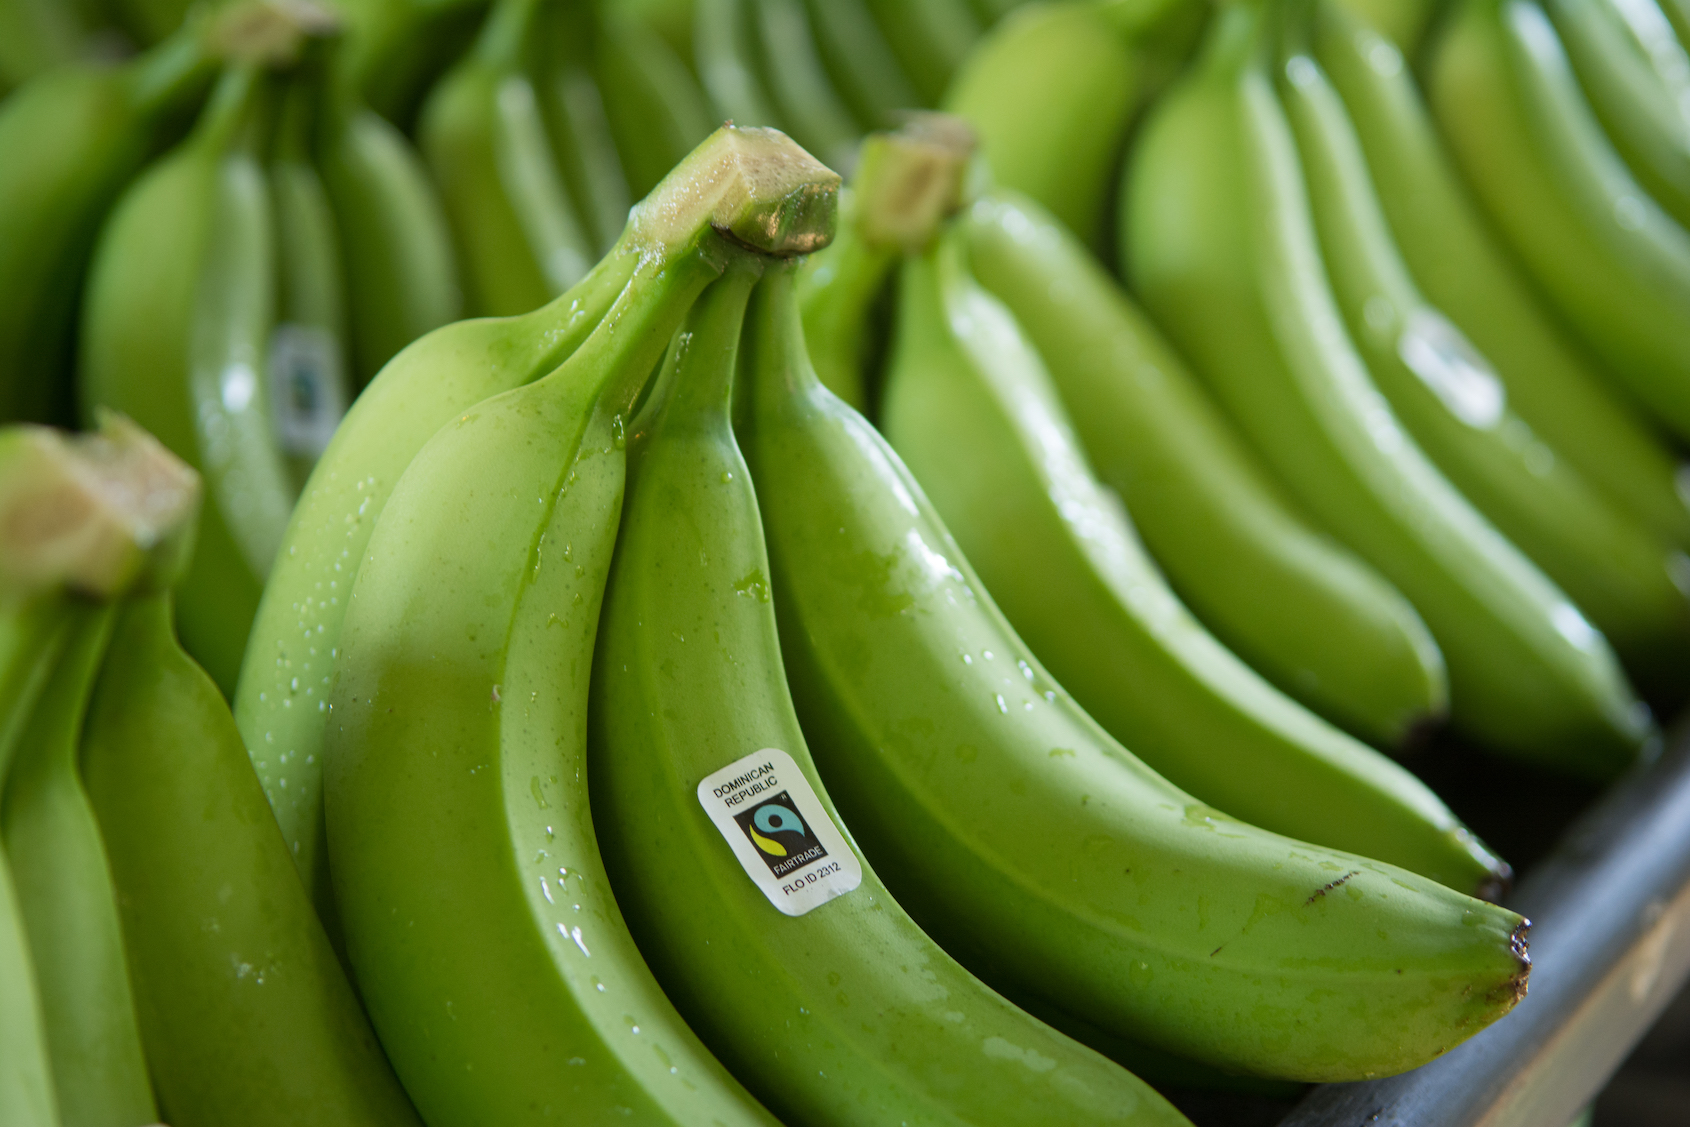 photo of bananas by Christian Nusch